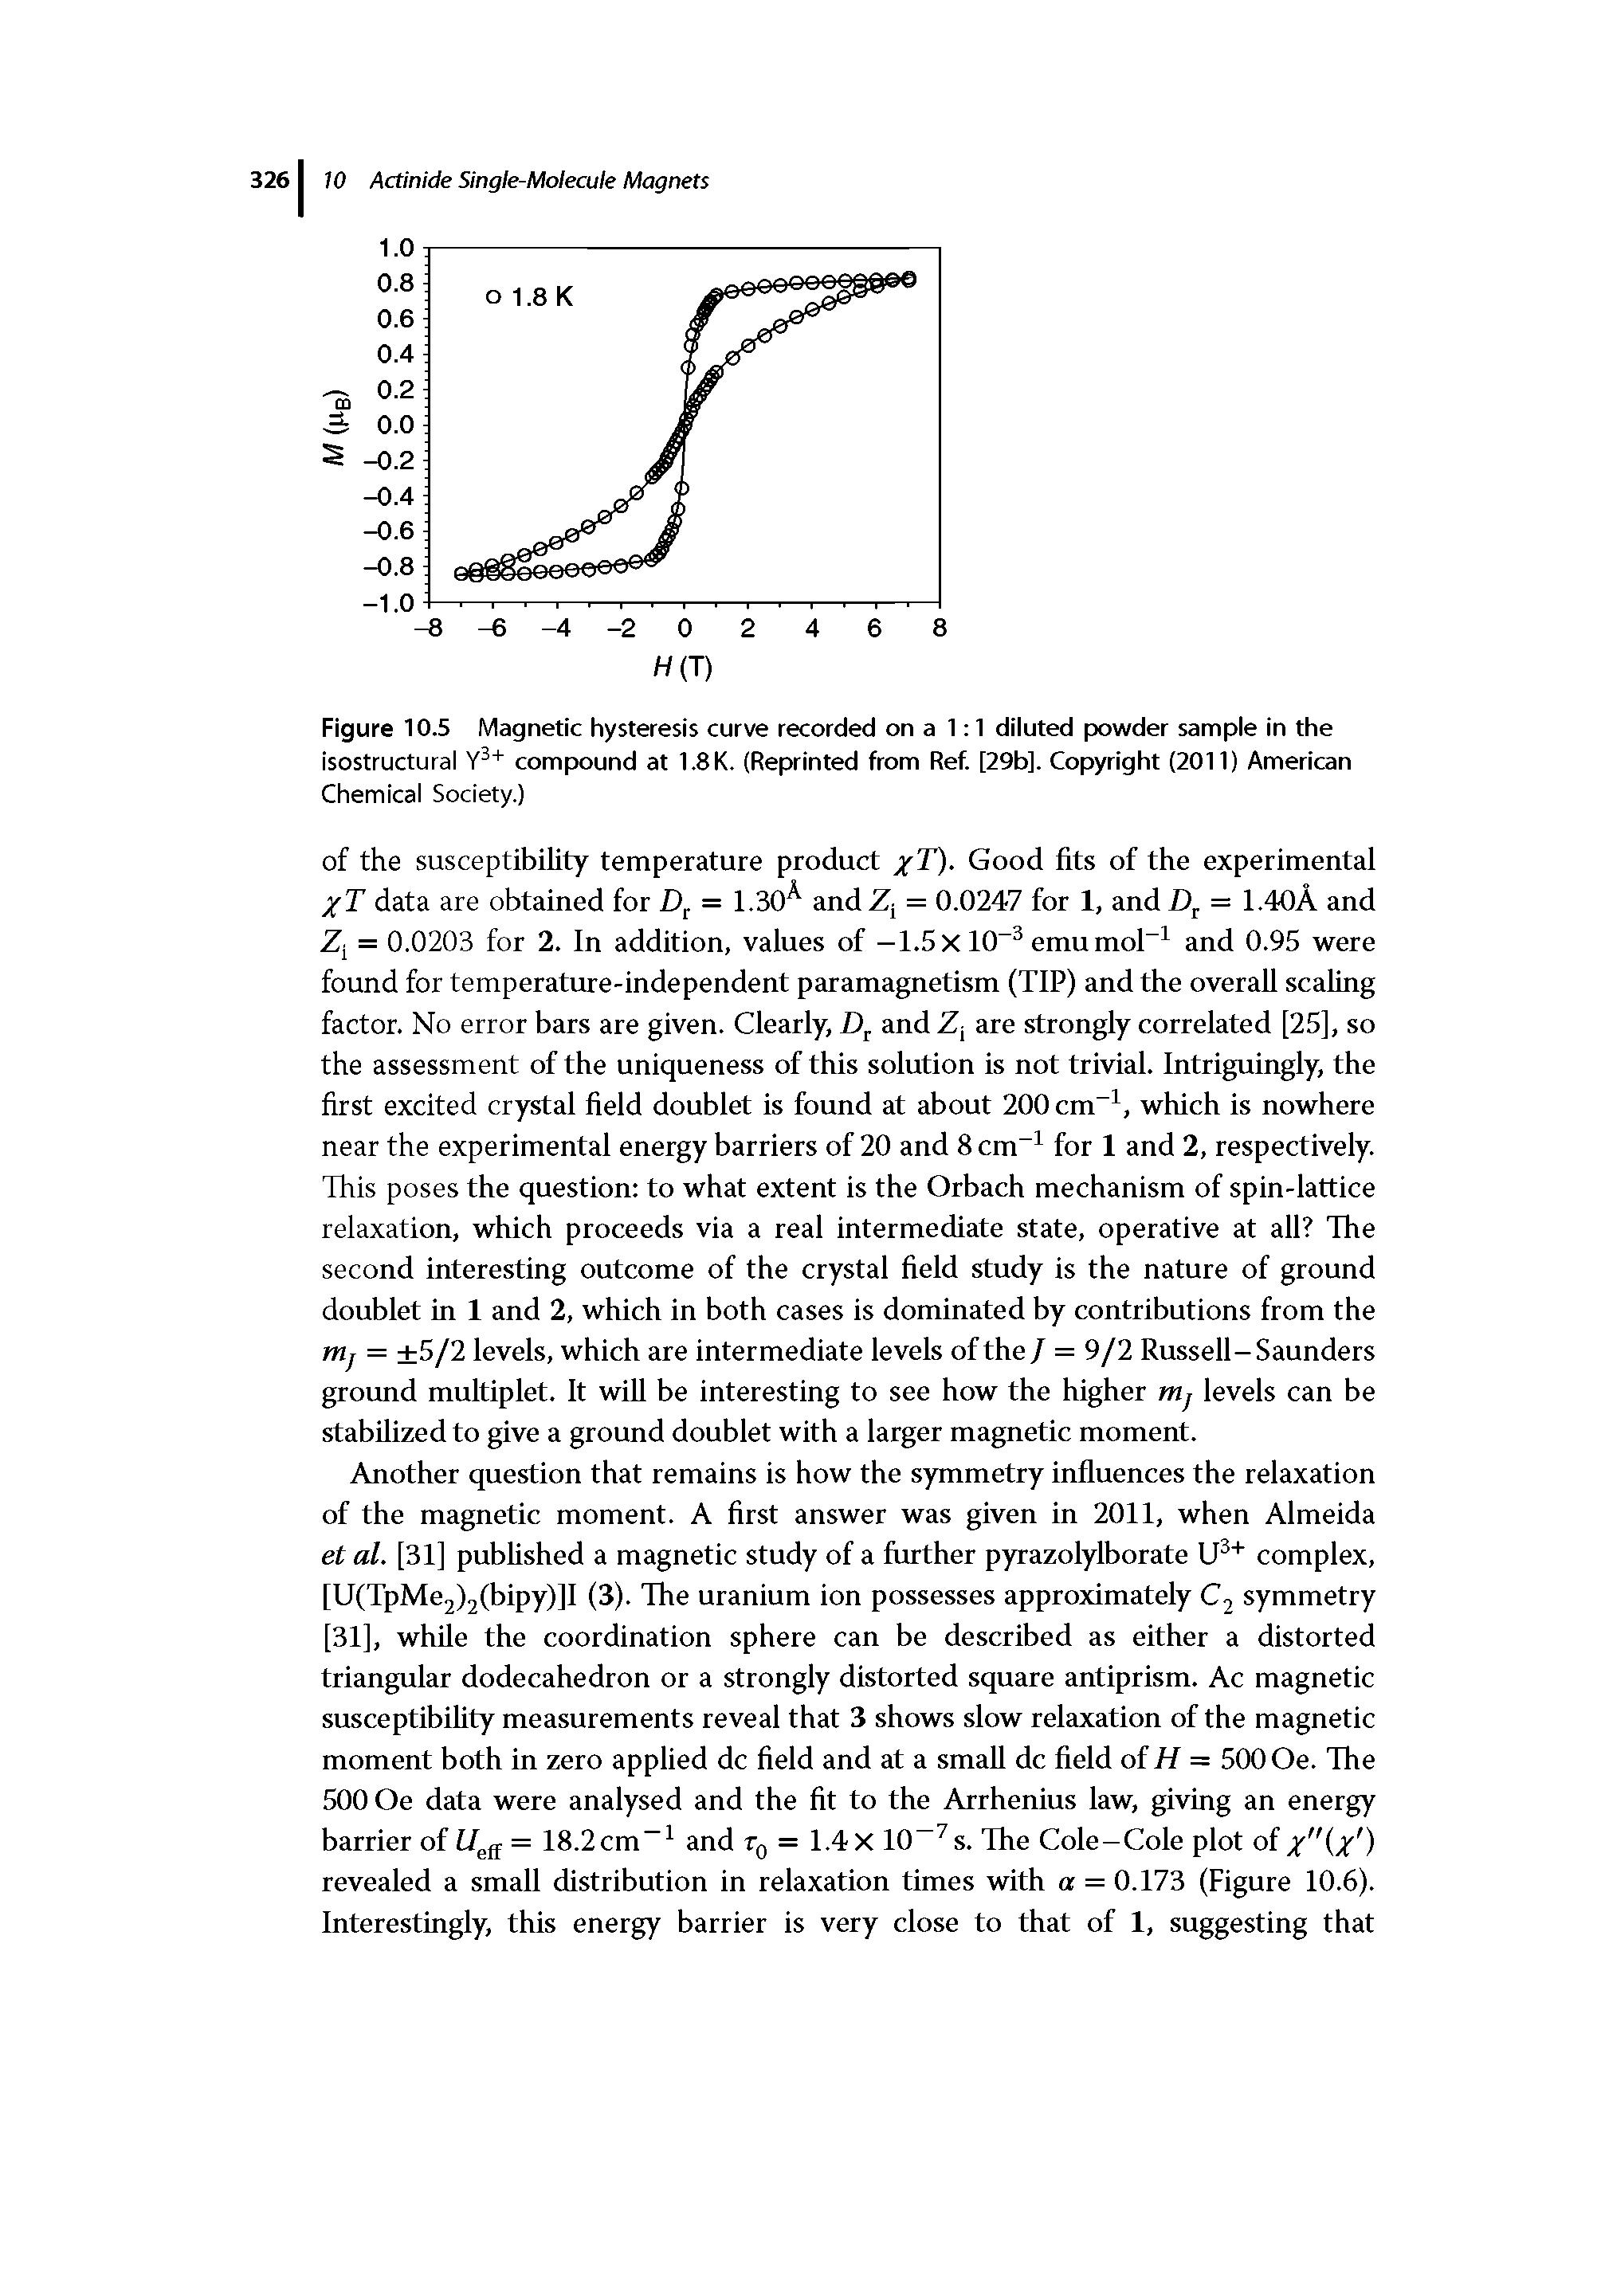 Figure 10.5 Magnetic hysteresis curve recorded on a 1 1 diluted powder sample in the isostructural Y3+ compound at 1.8K. (Reprinted from Ref. [29b]. Copyright (2011) American Chemical Society.)...